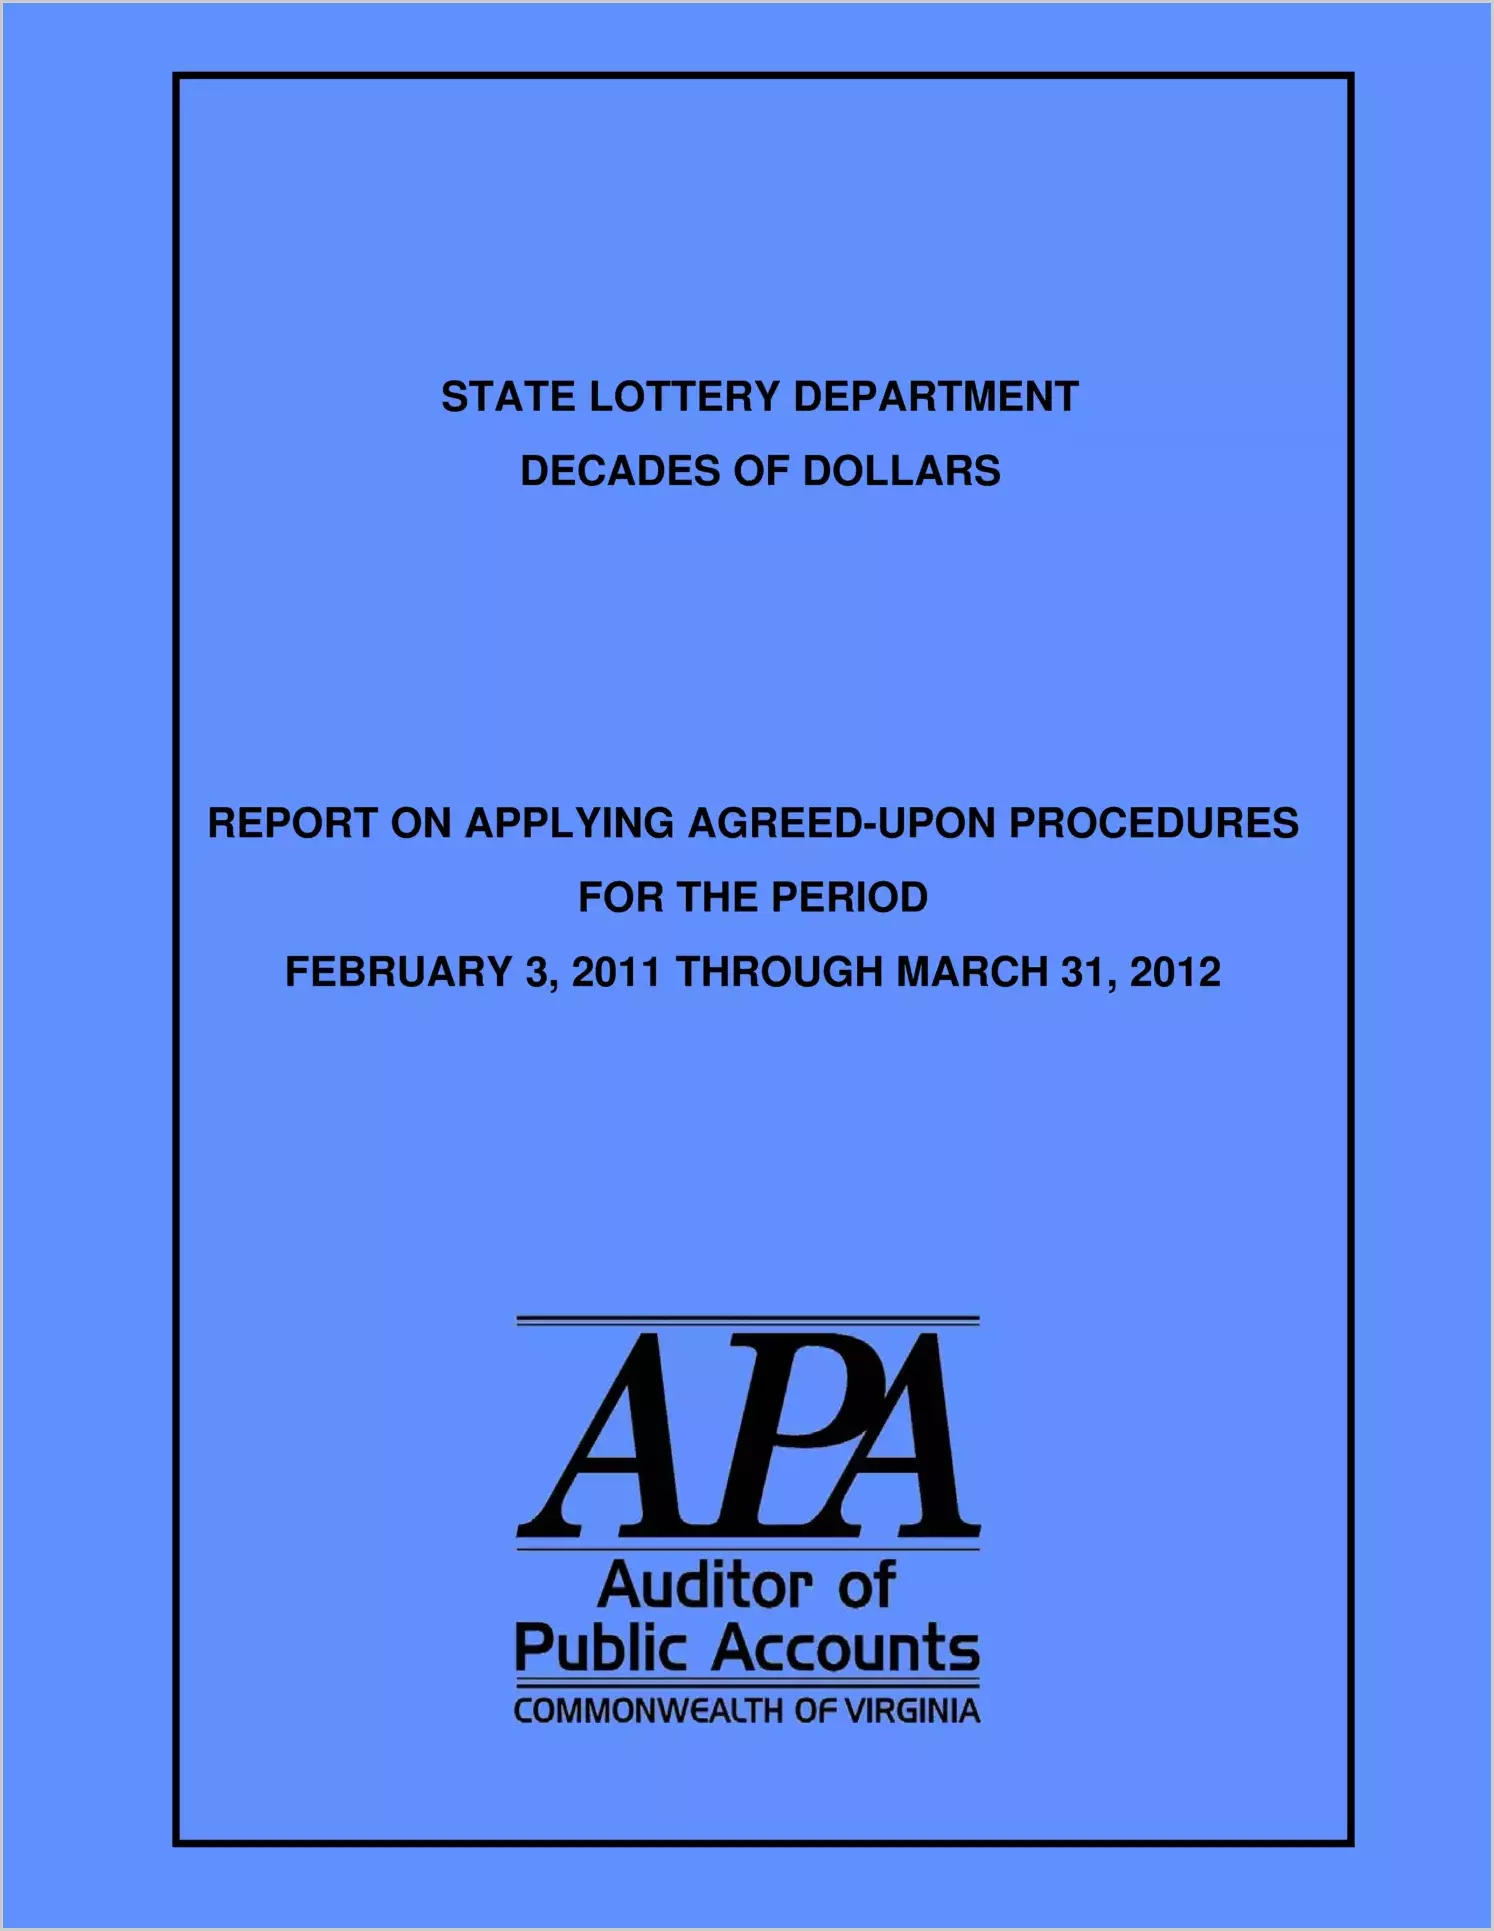 State Lottery Department Decades of Dollars report on Applying Agreed-Upon Procedures for the period February 3, 2011 through March 31, 2012